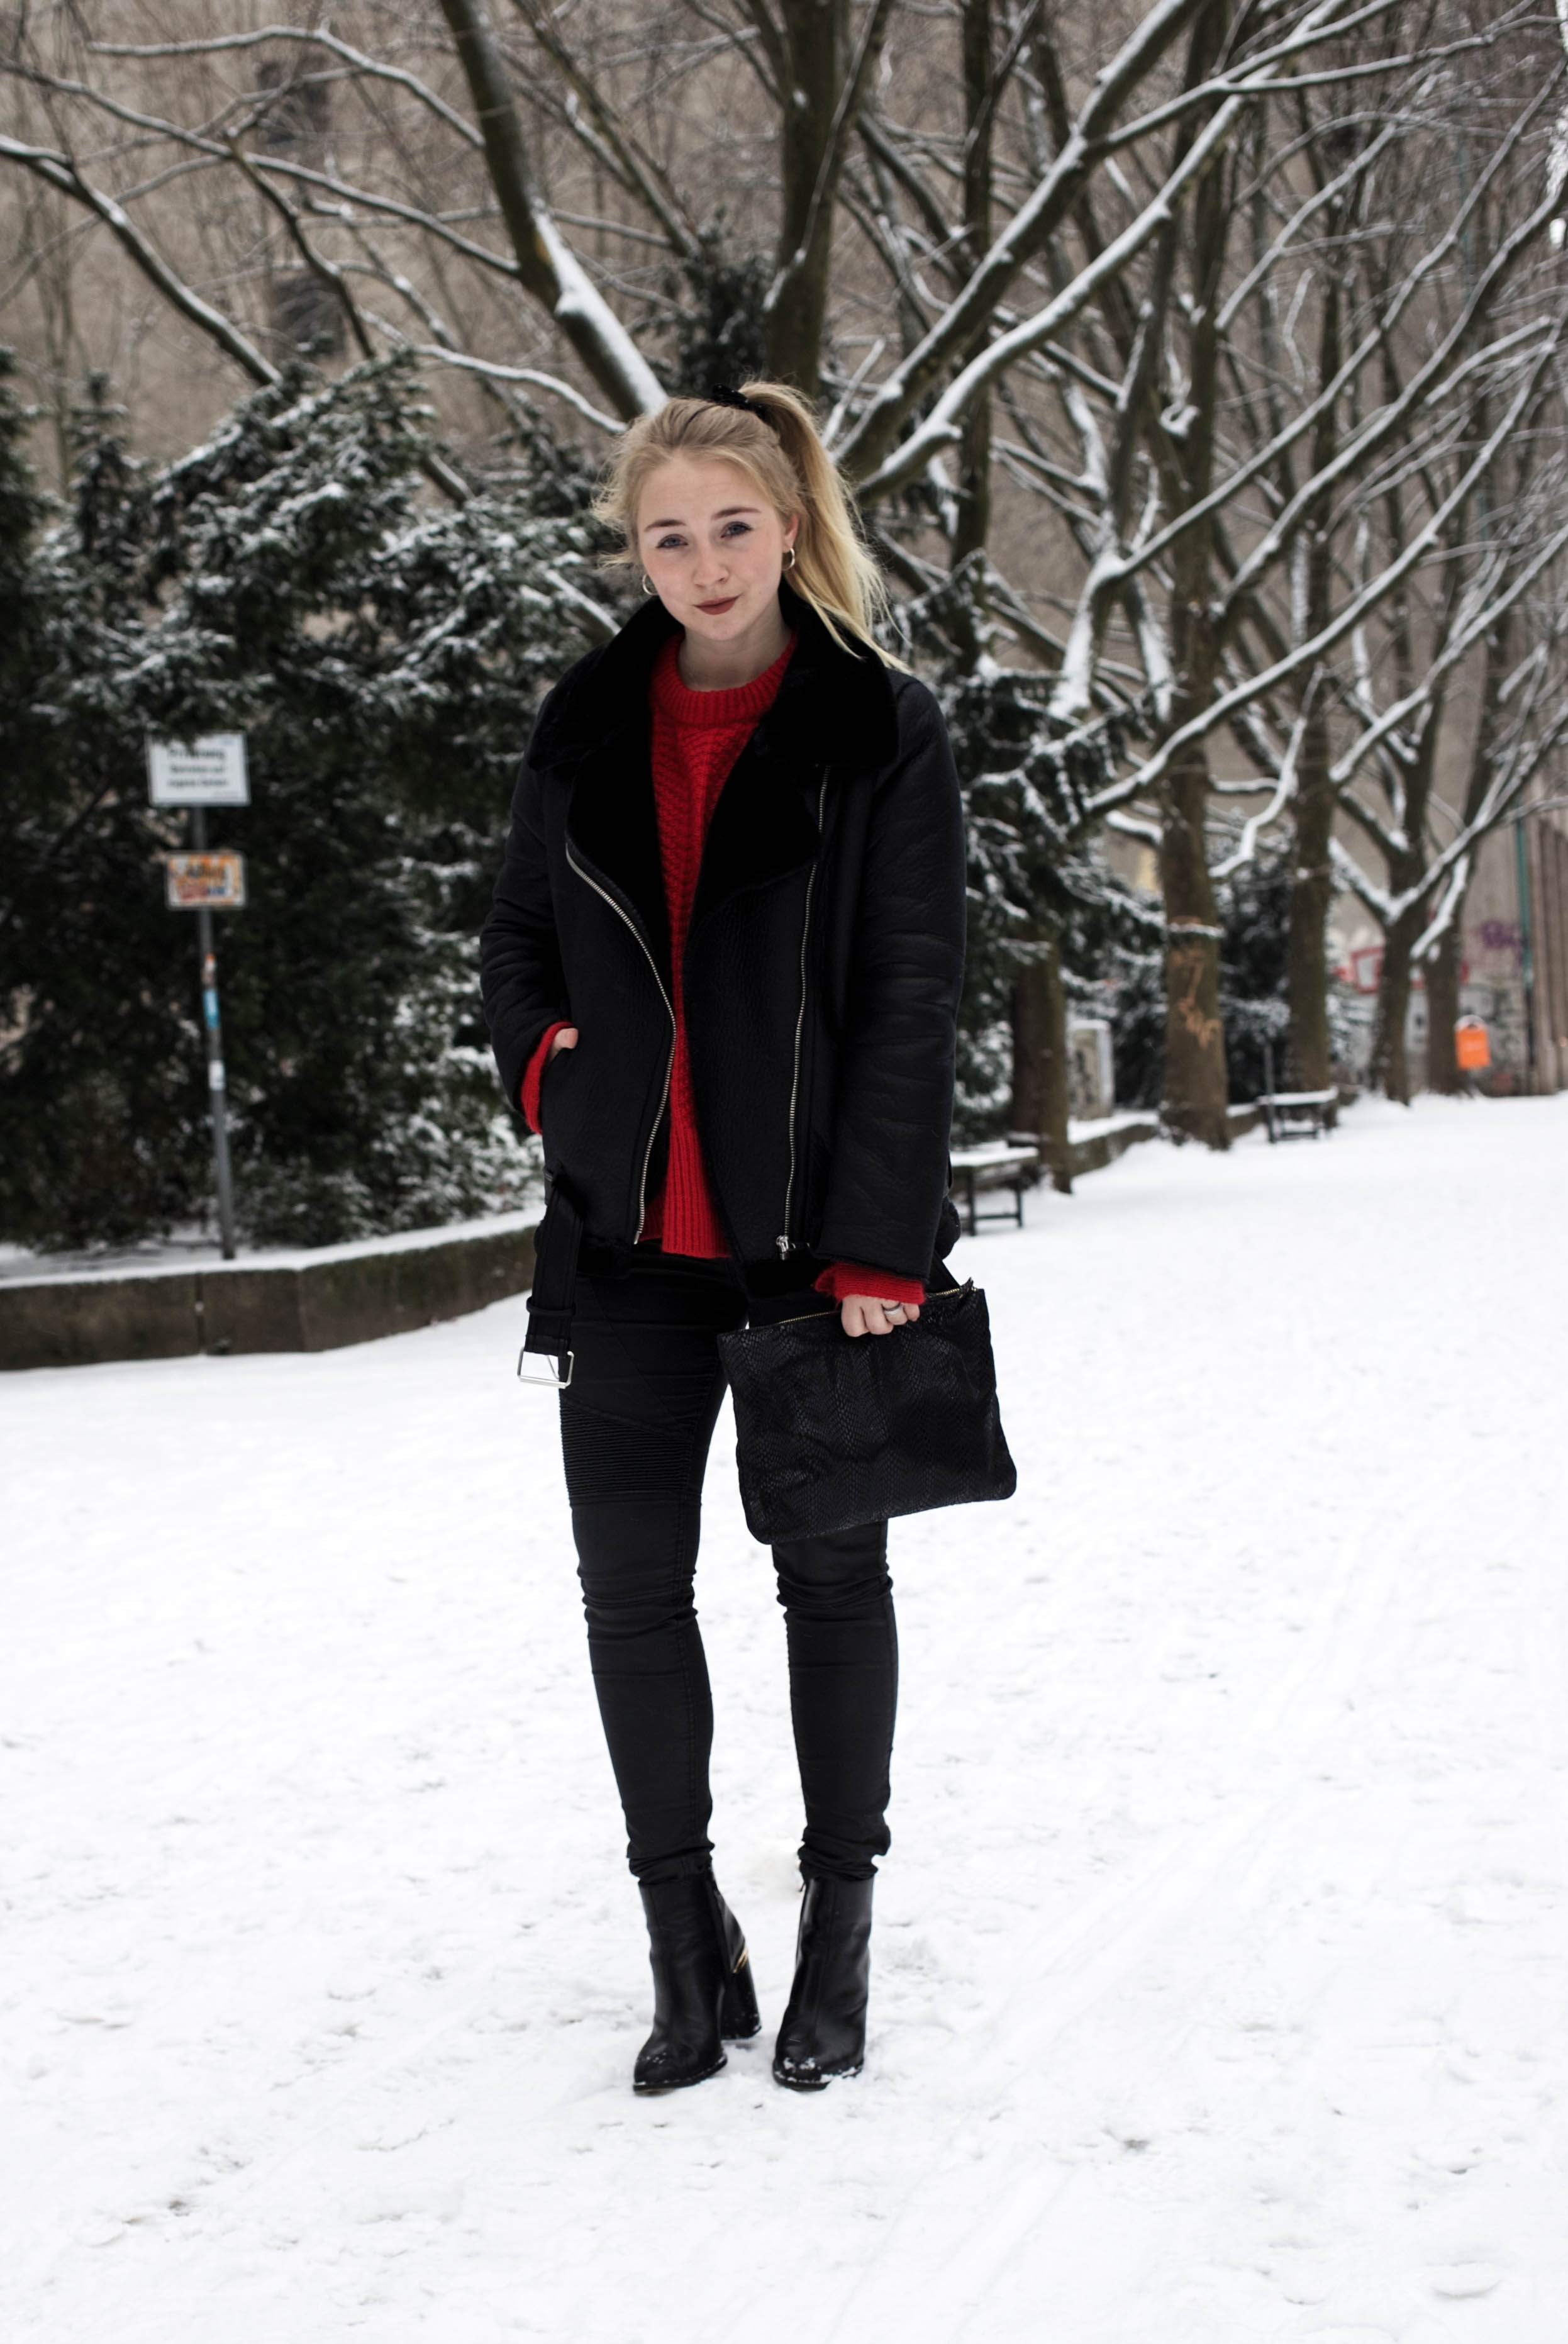 roter-pullover-outfit-berlin-schnee-streetstyle-fashionblog-modeblog_8285